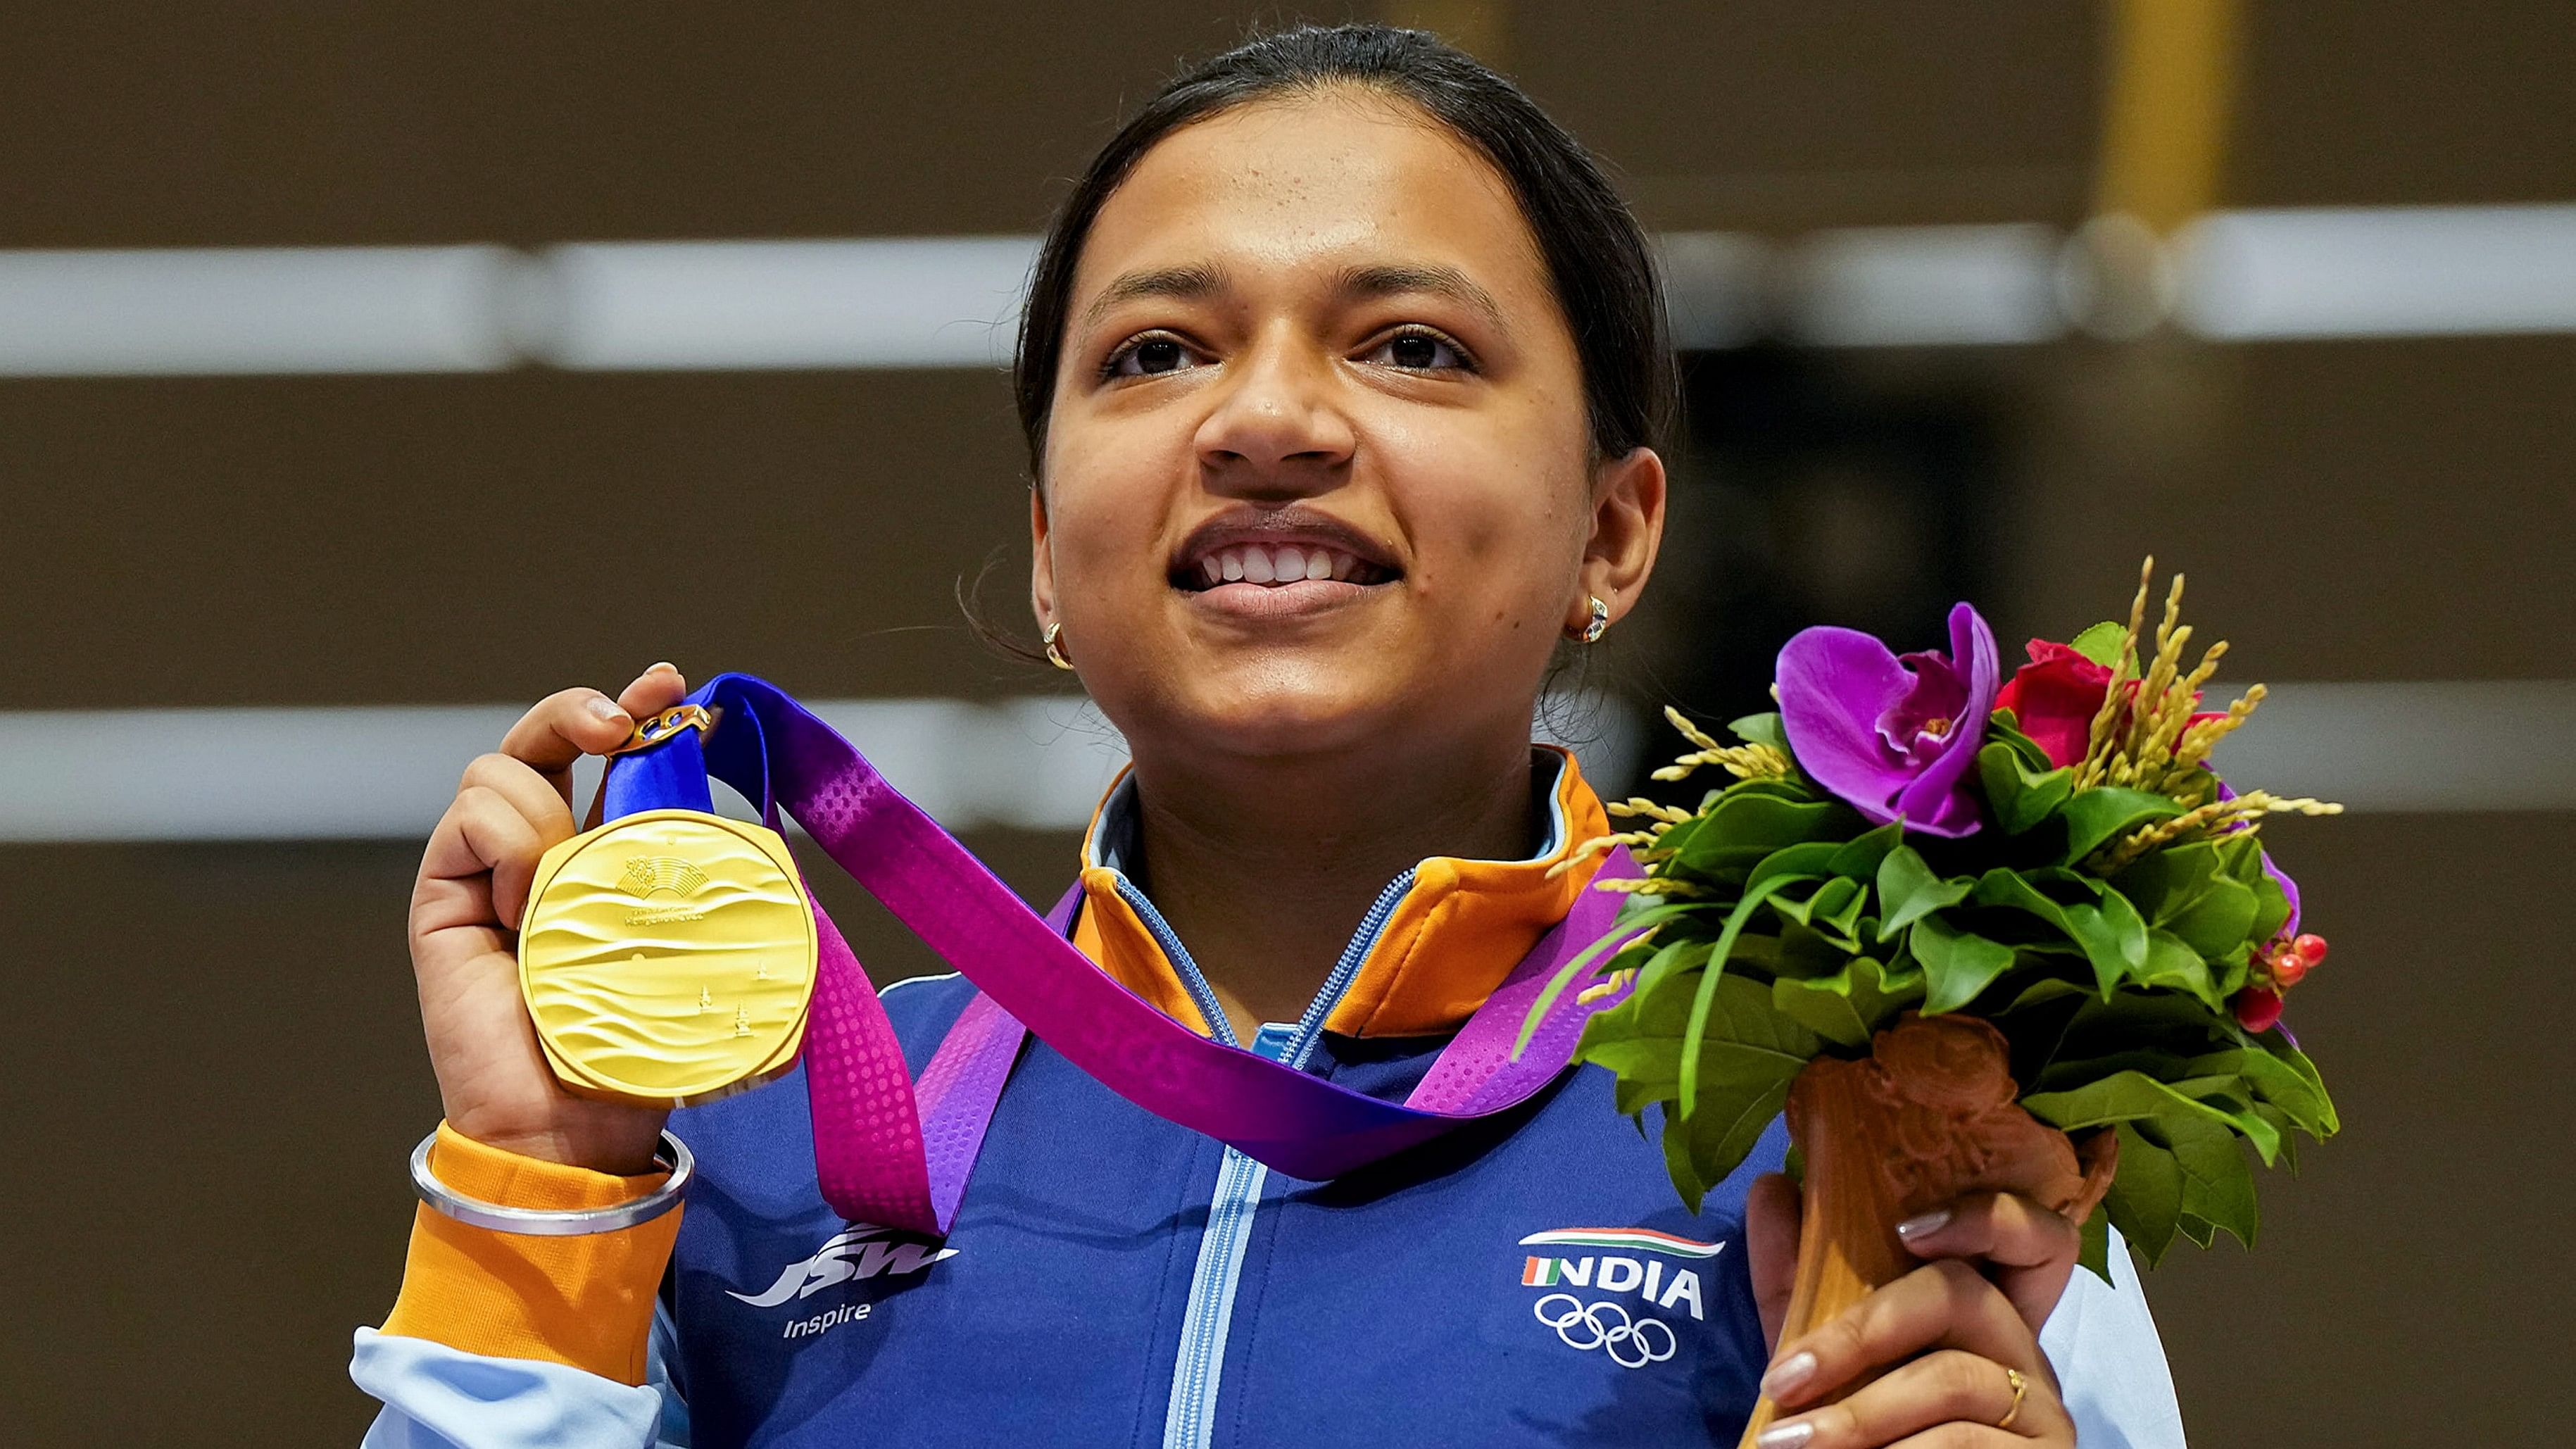 <div class="paragraphs"><p>Shooter Sift Kaur Samra poses for photos with her gold medal during the presentation ceremony of the women's 50m rifle 3 positions event at the 19th Asian Games, in Hangzhou, China.</p></div>